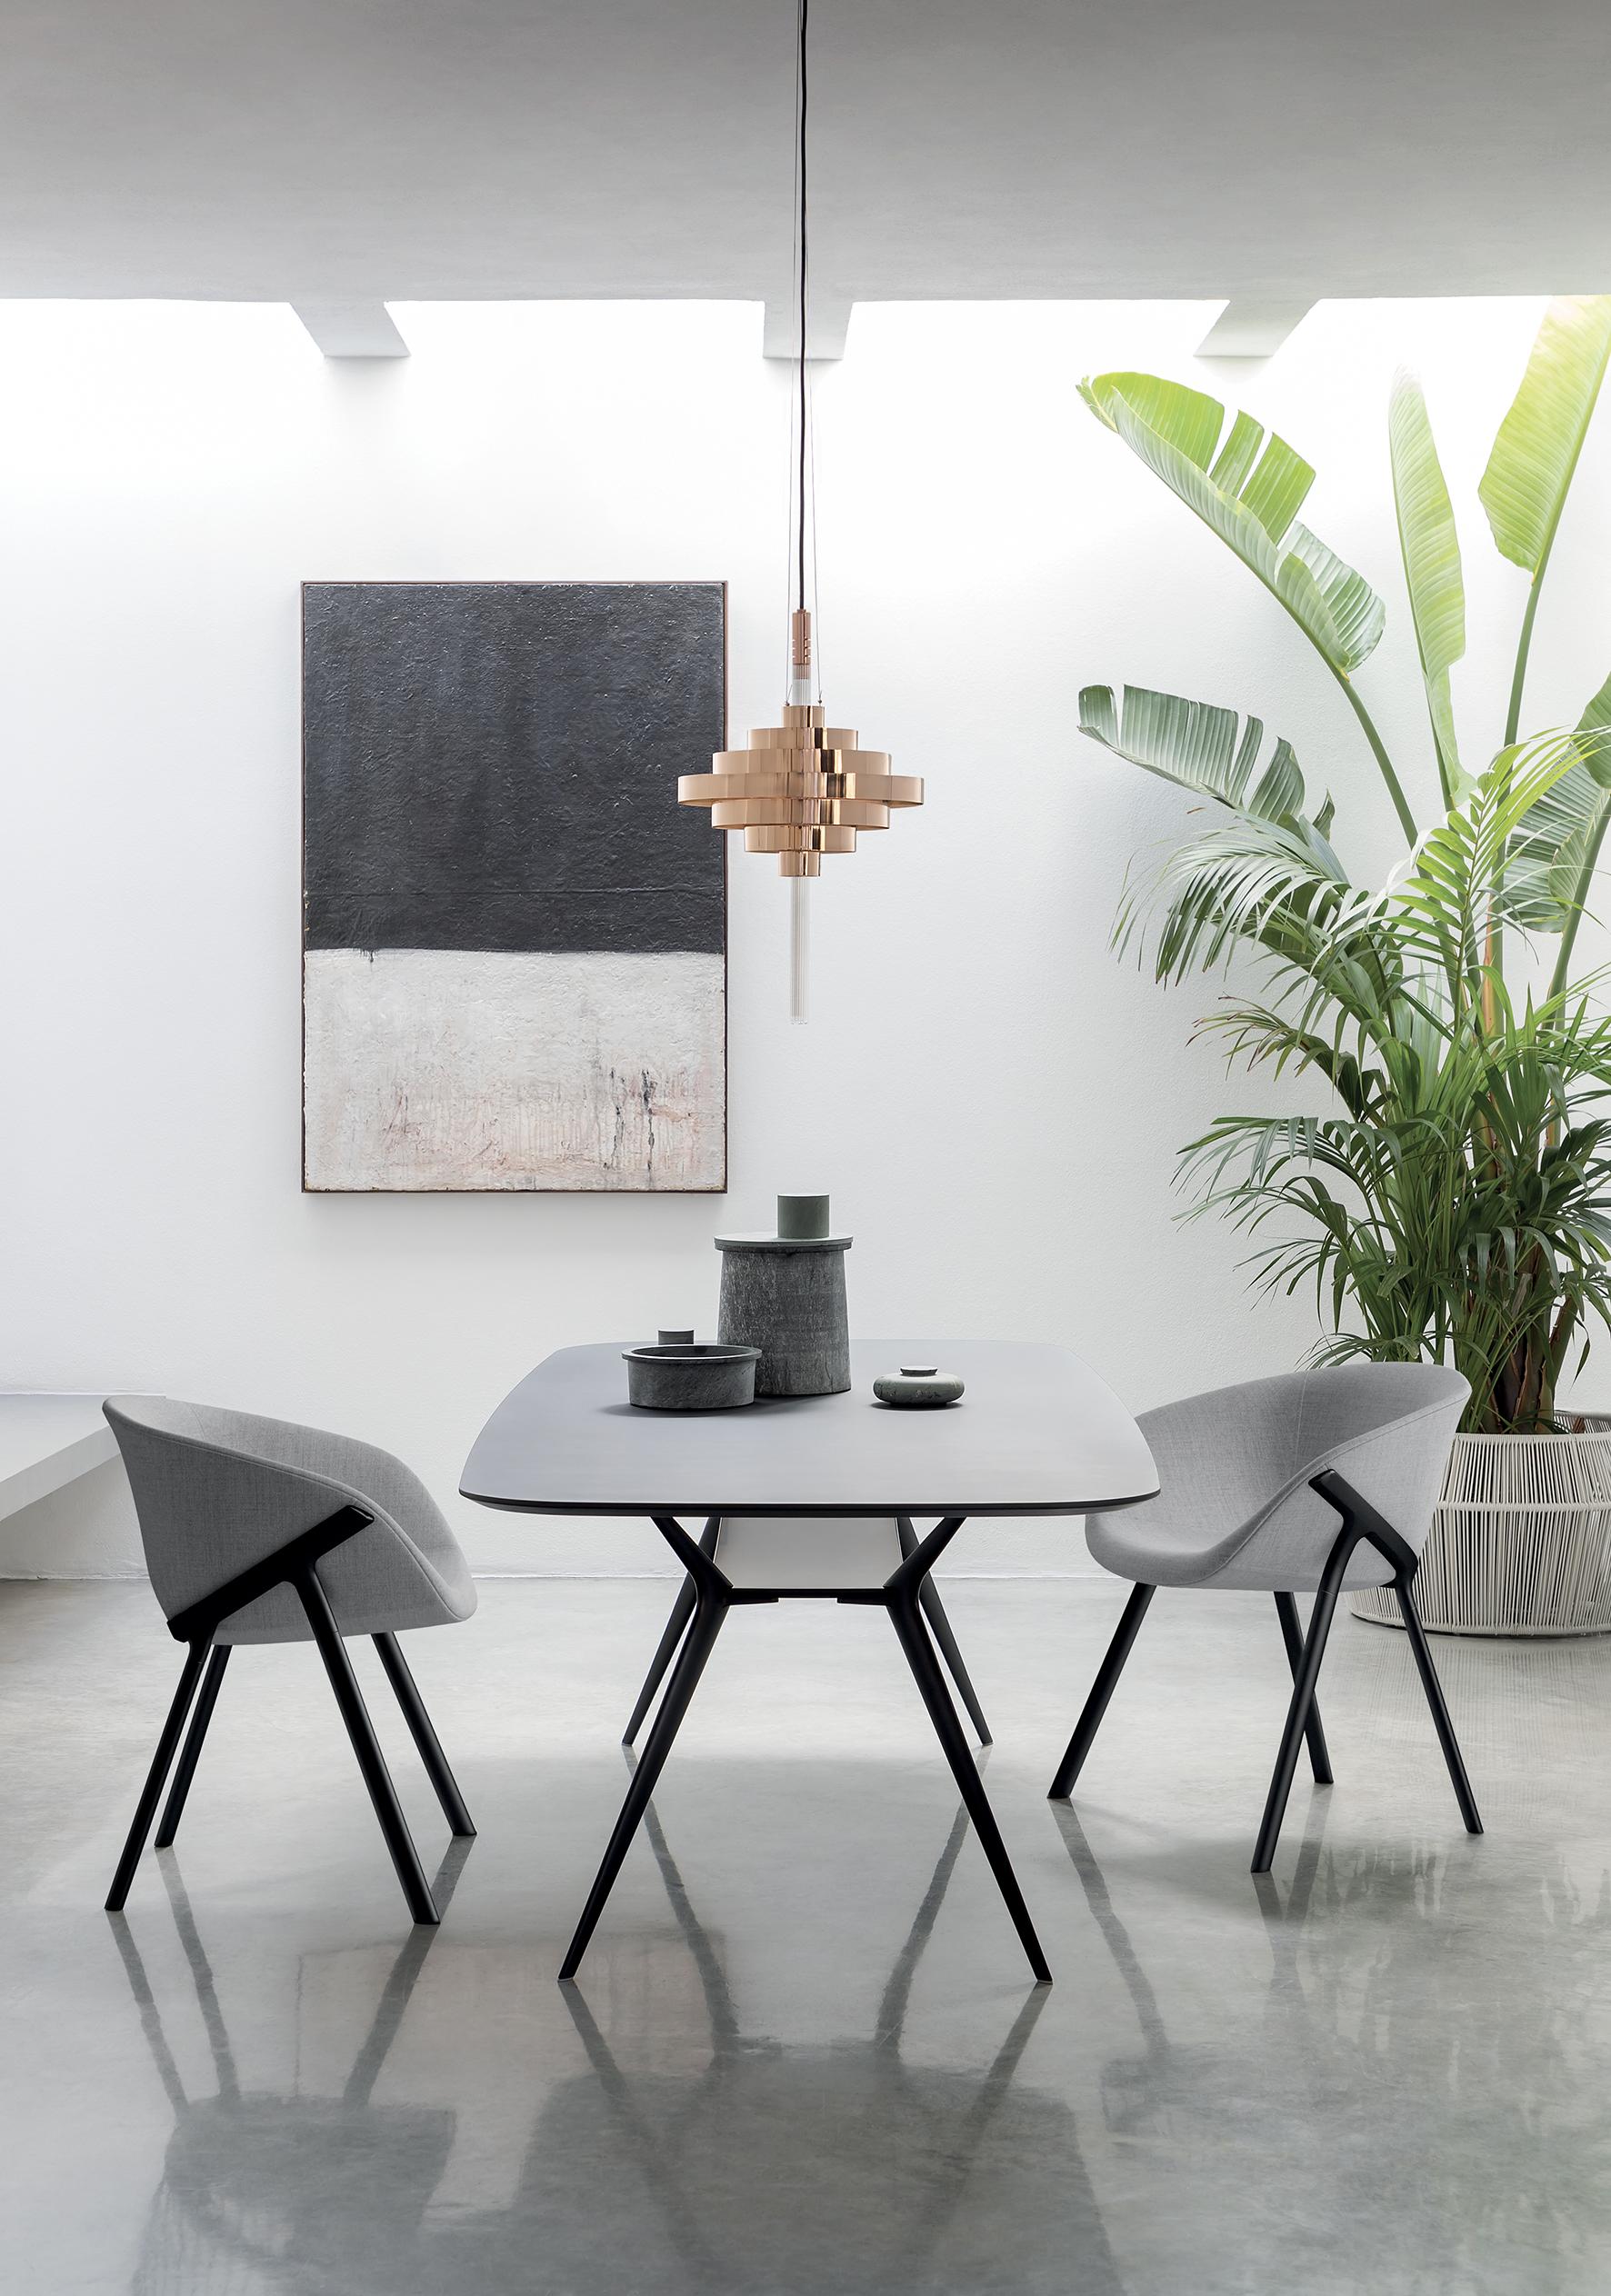 Alias Biplane 403 Table in Marble Top with White Lacquered Aluminium Frame by Alberto Meda

Round table with structure composed of 4 legs in diecast aluminium with painted or polished finishes, connected by a shelf.
Top available in: - Lacquered